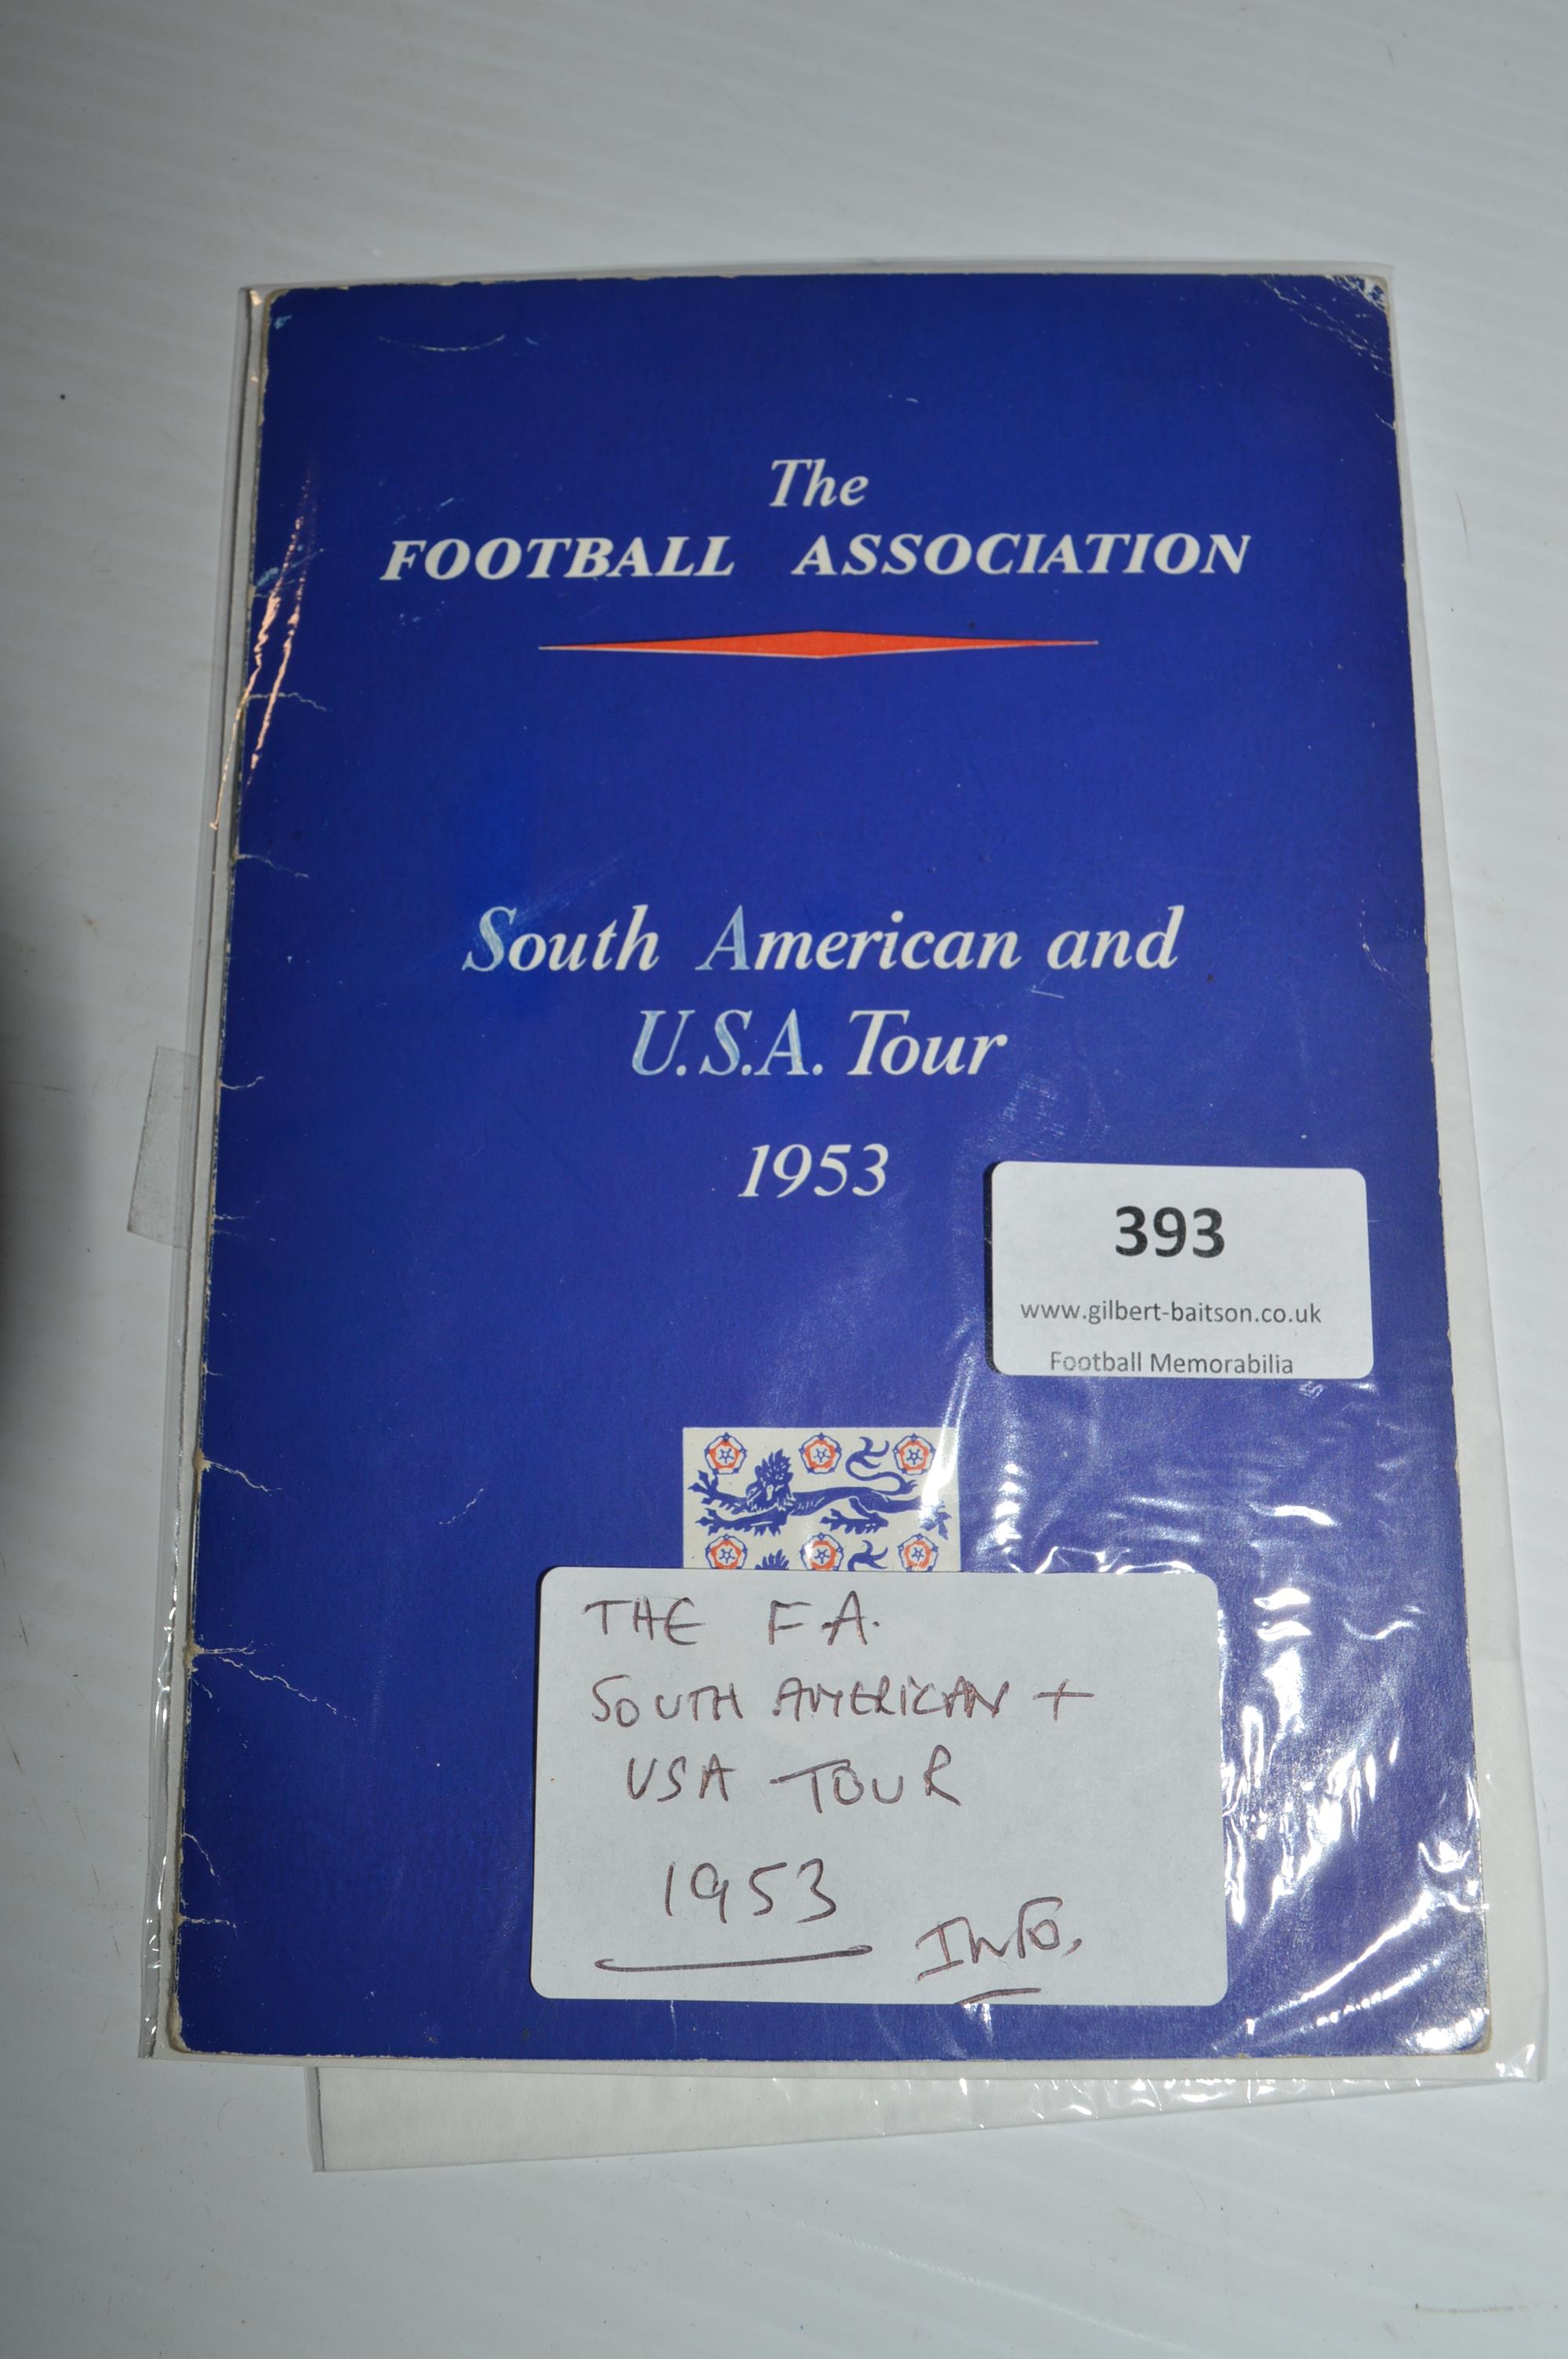 Football Association South American and U.S.A. Tour 1953